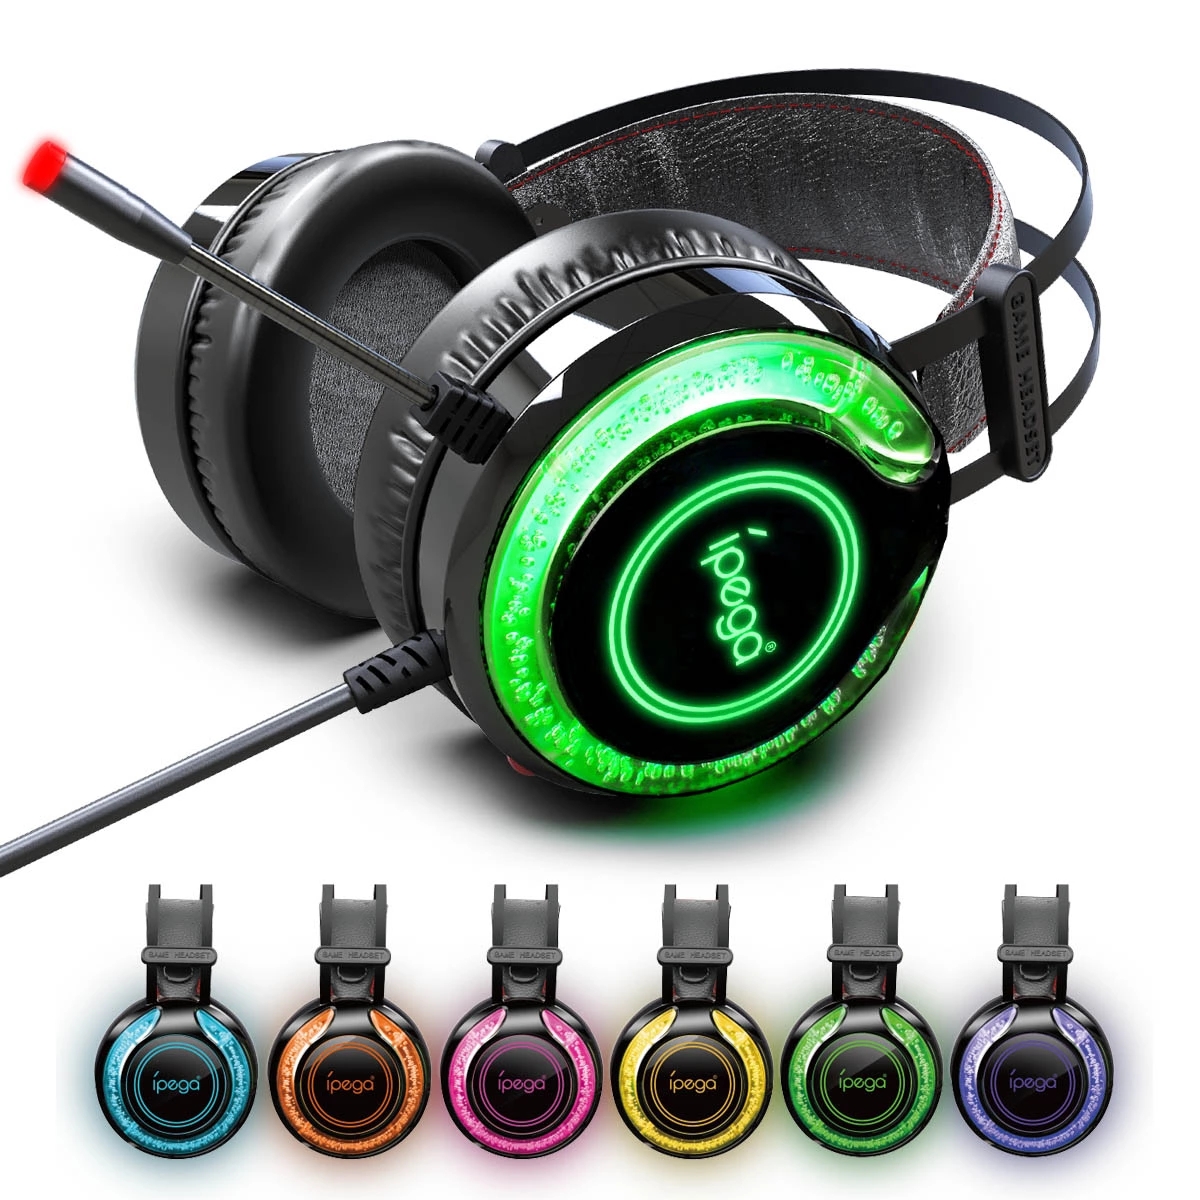 IPega-PG-R015-LED-Light-Suitable-Stereo-bass-Gaming-Headset-Headphone-with-Mic-for-PS4-for-XBoxs-for-1796080-8